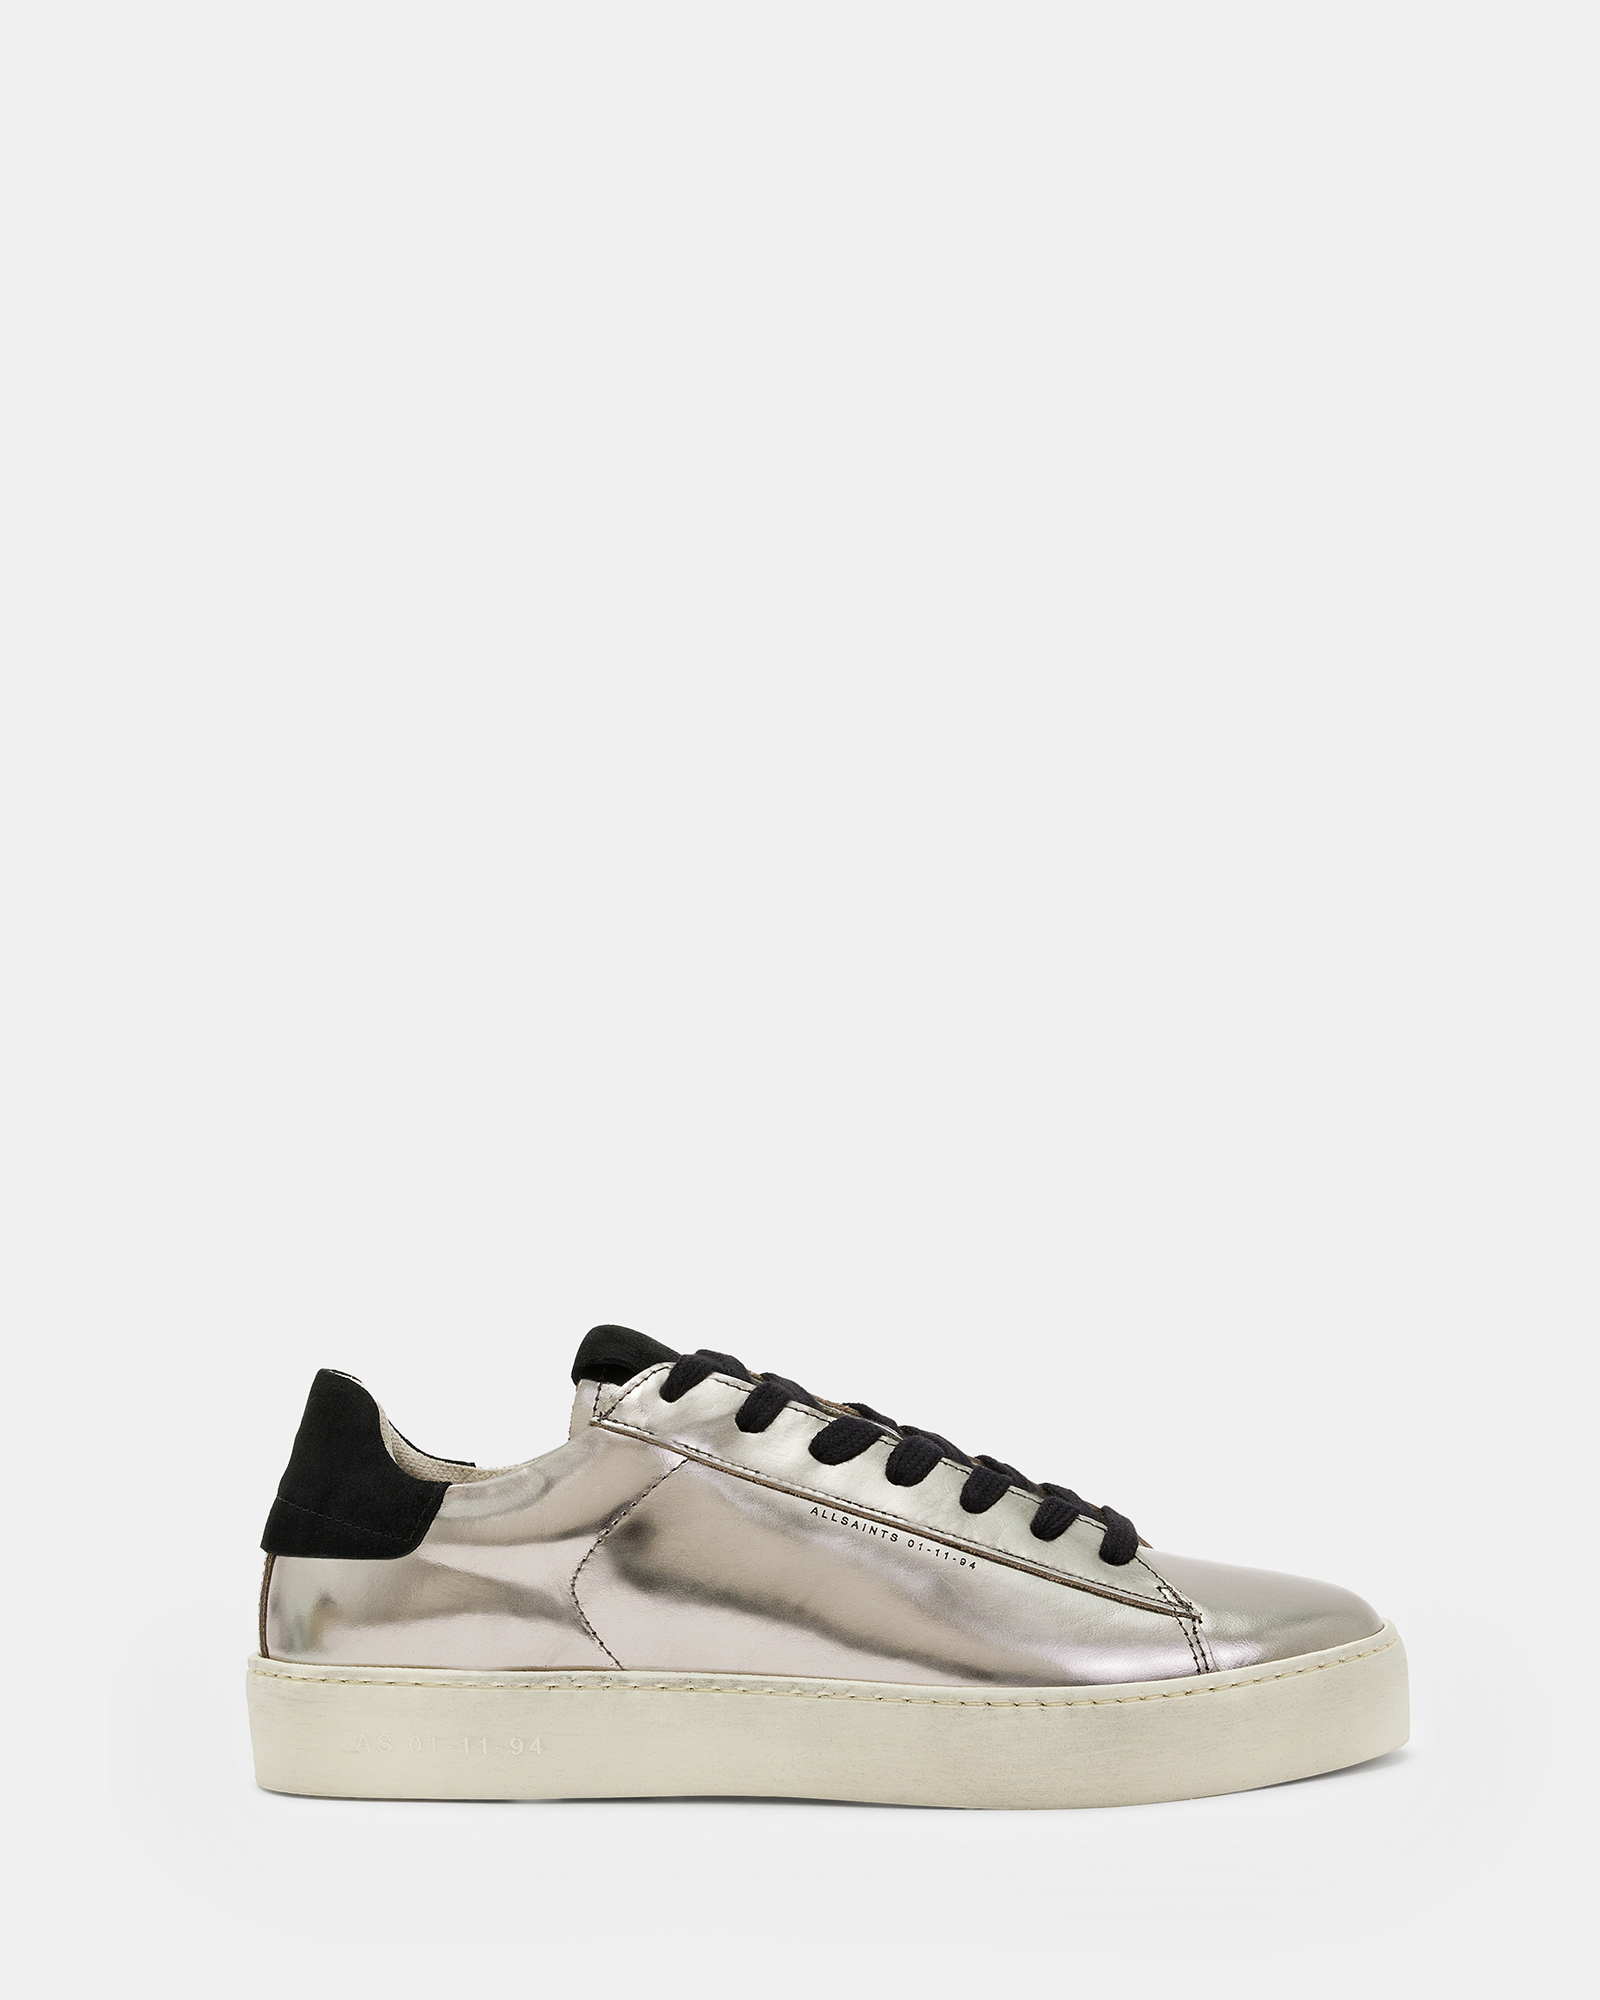 AllSaints Shana Low Top Metallic Leather Trainers,, Silver